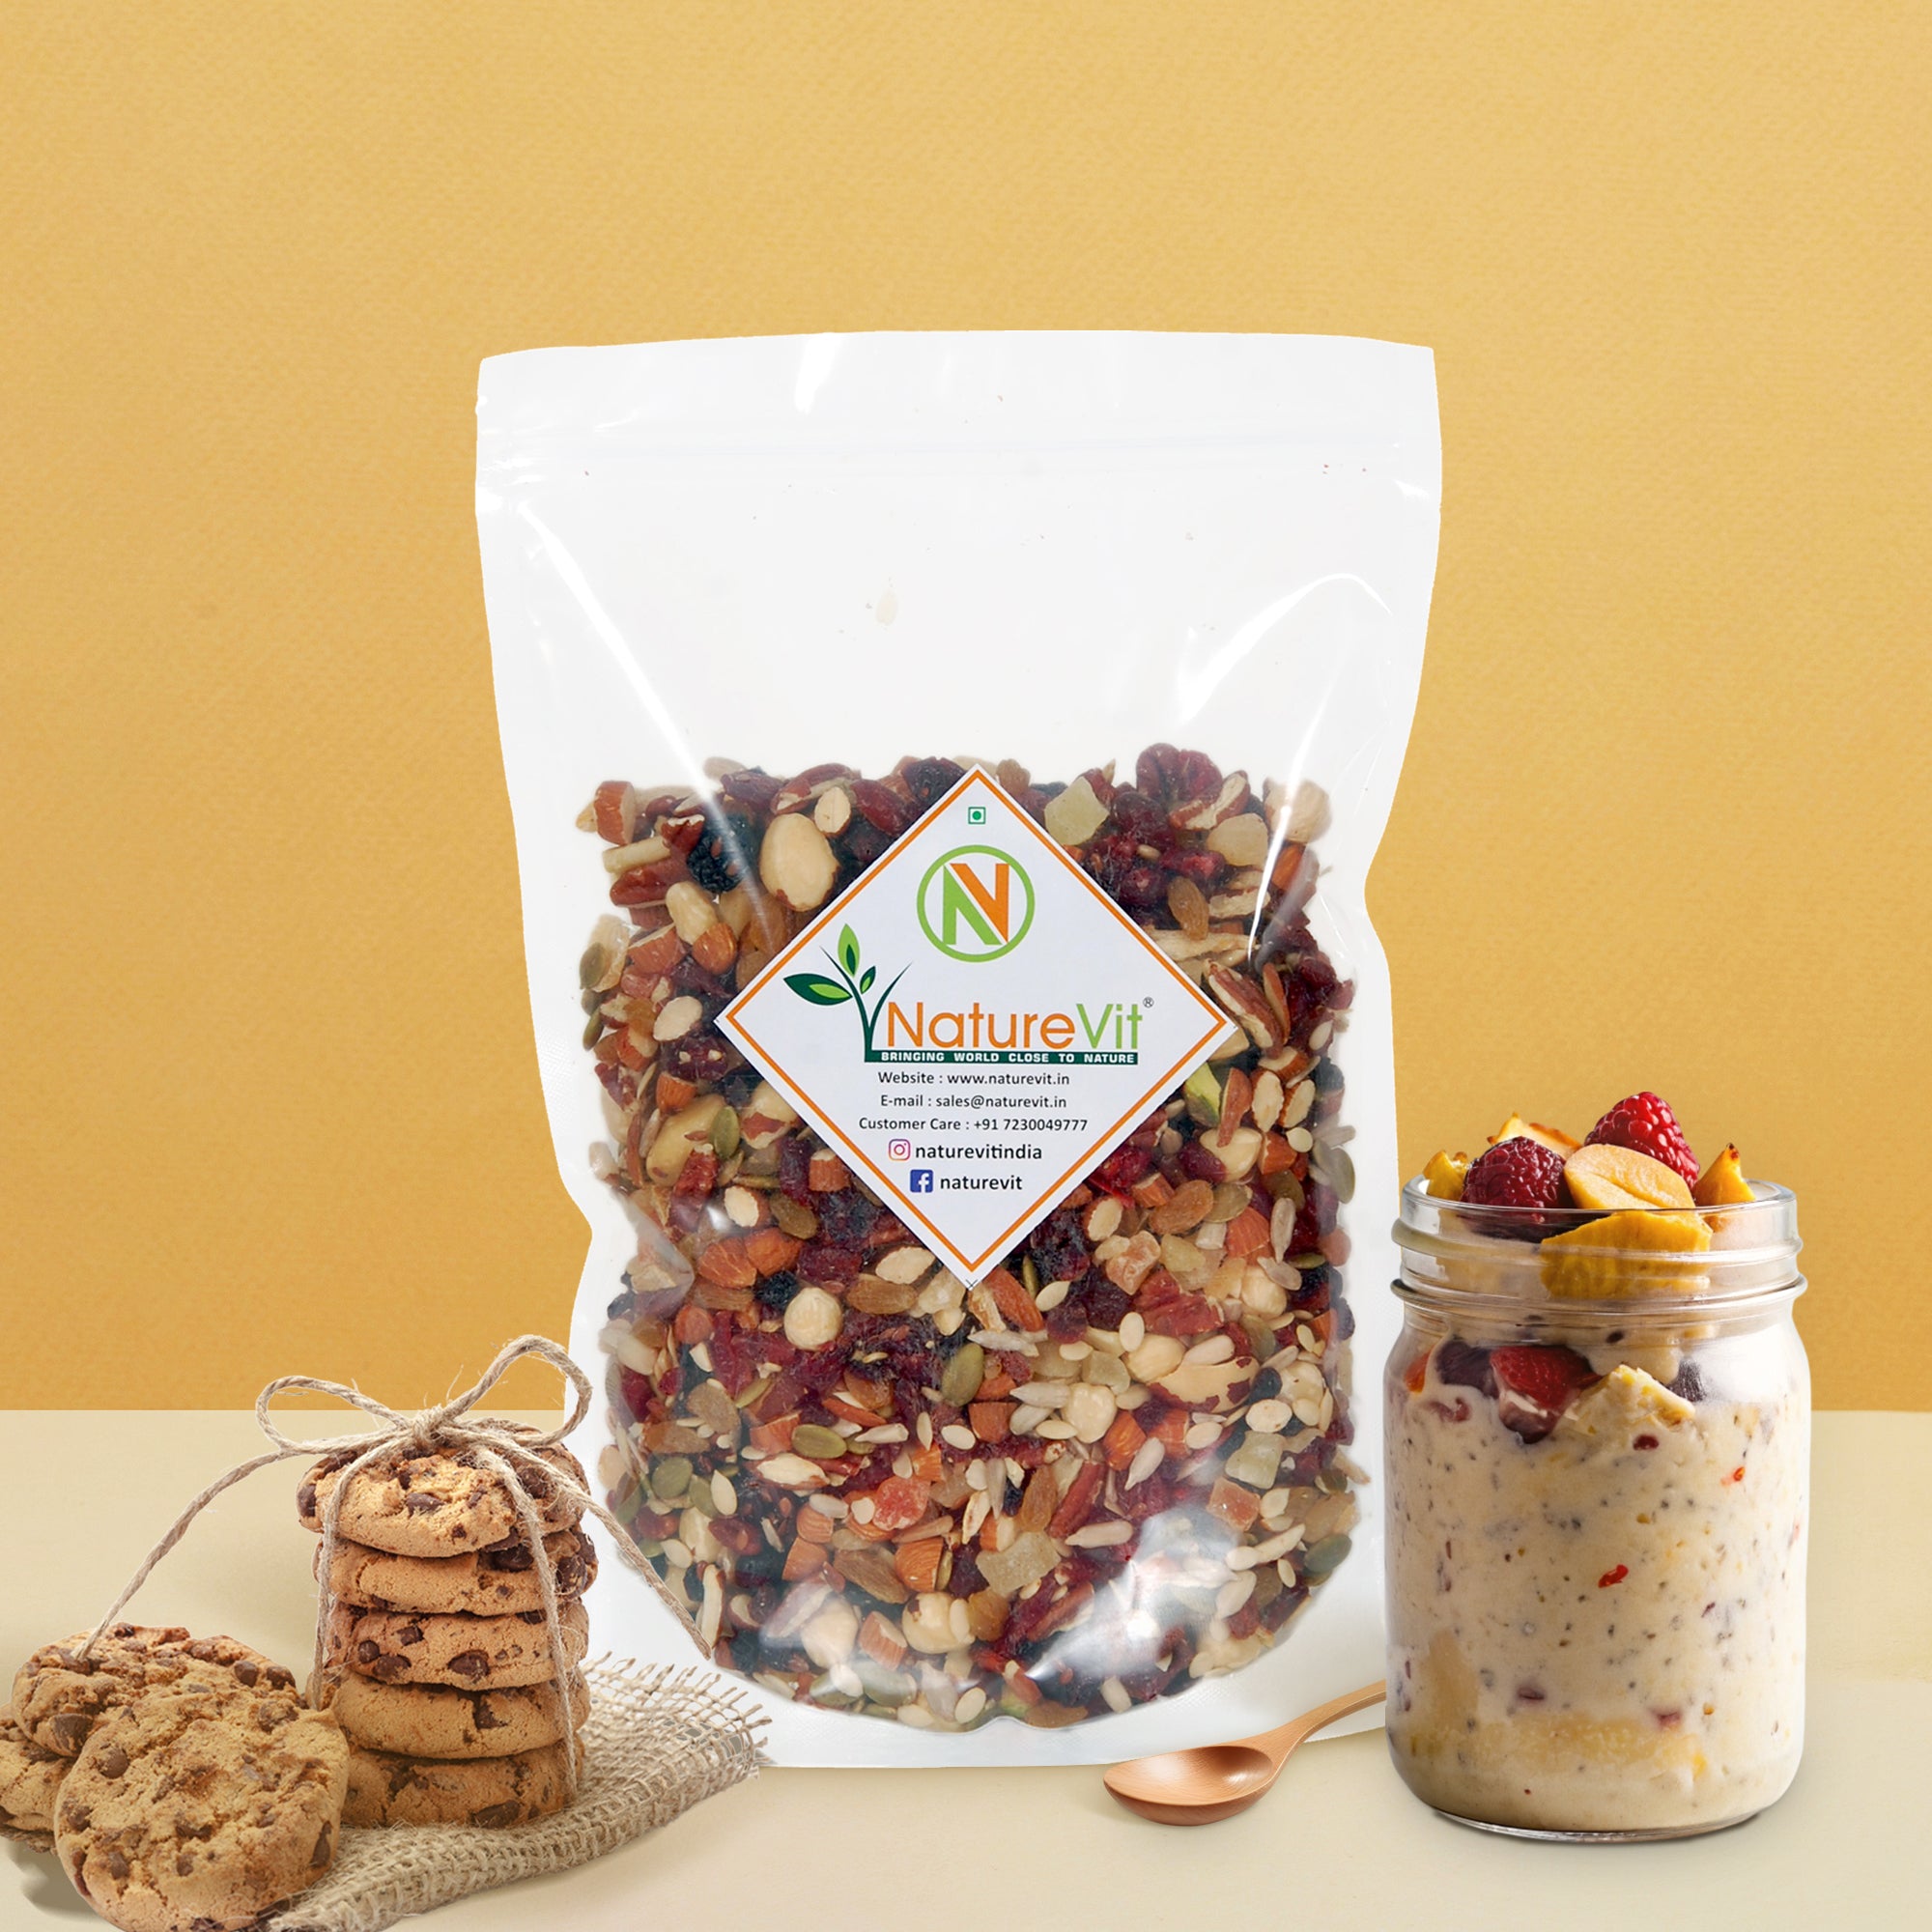 NatureVit Mixed Dry Fruits, Nuts, Seeds & Berries